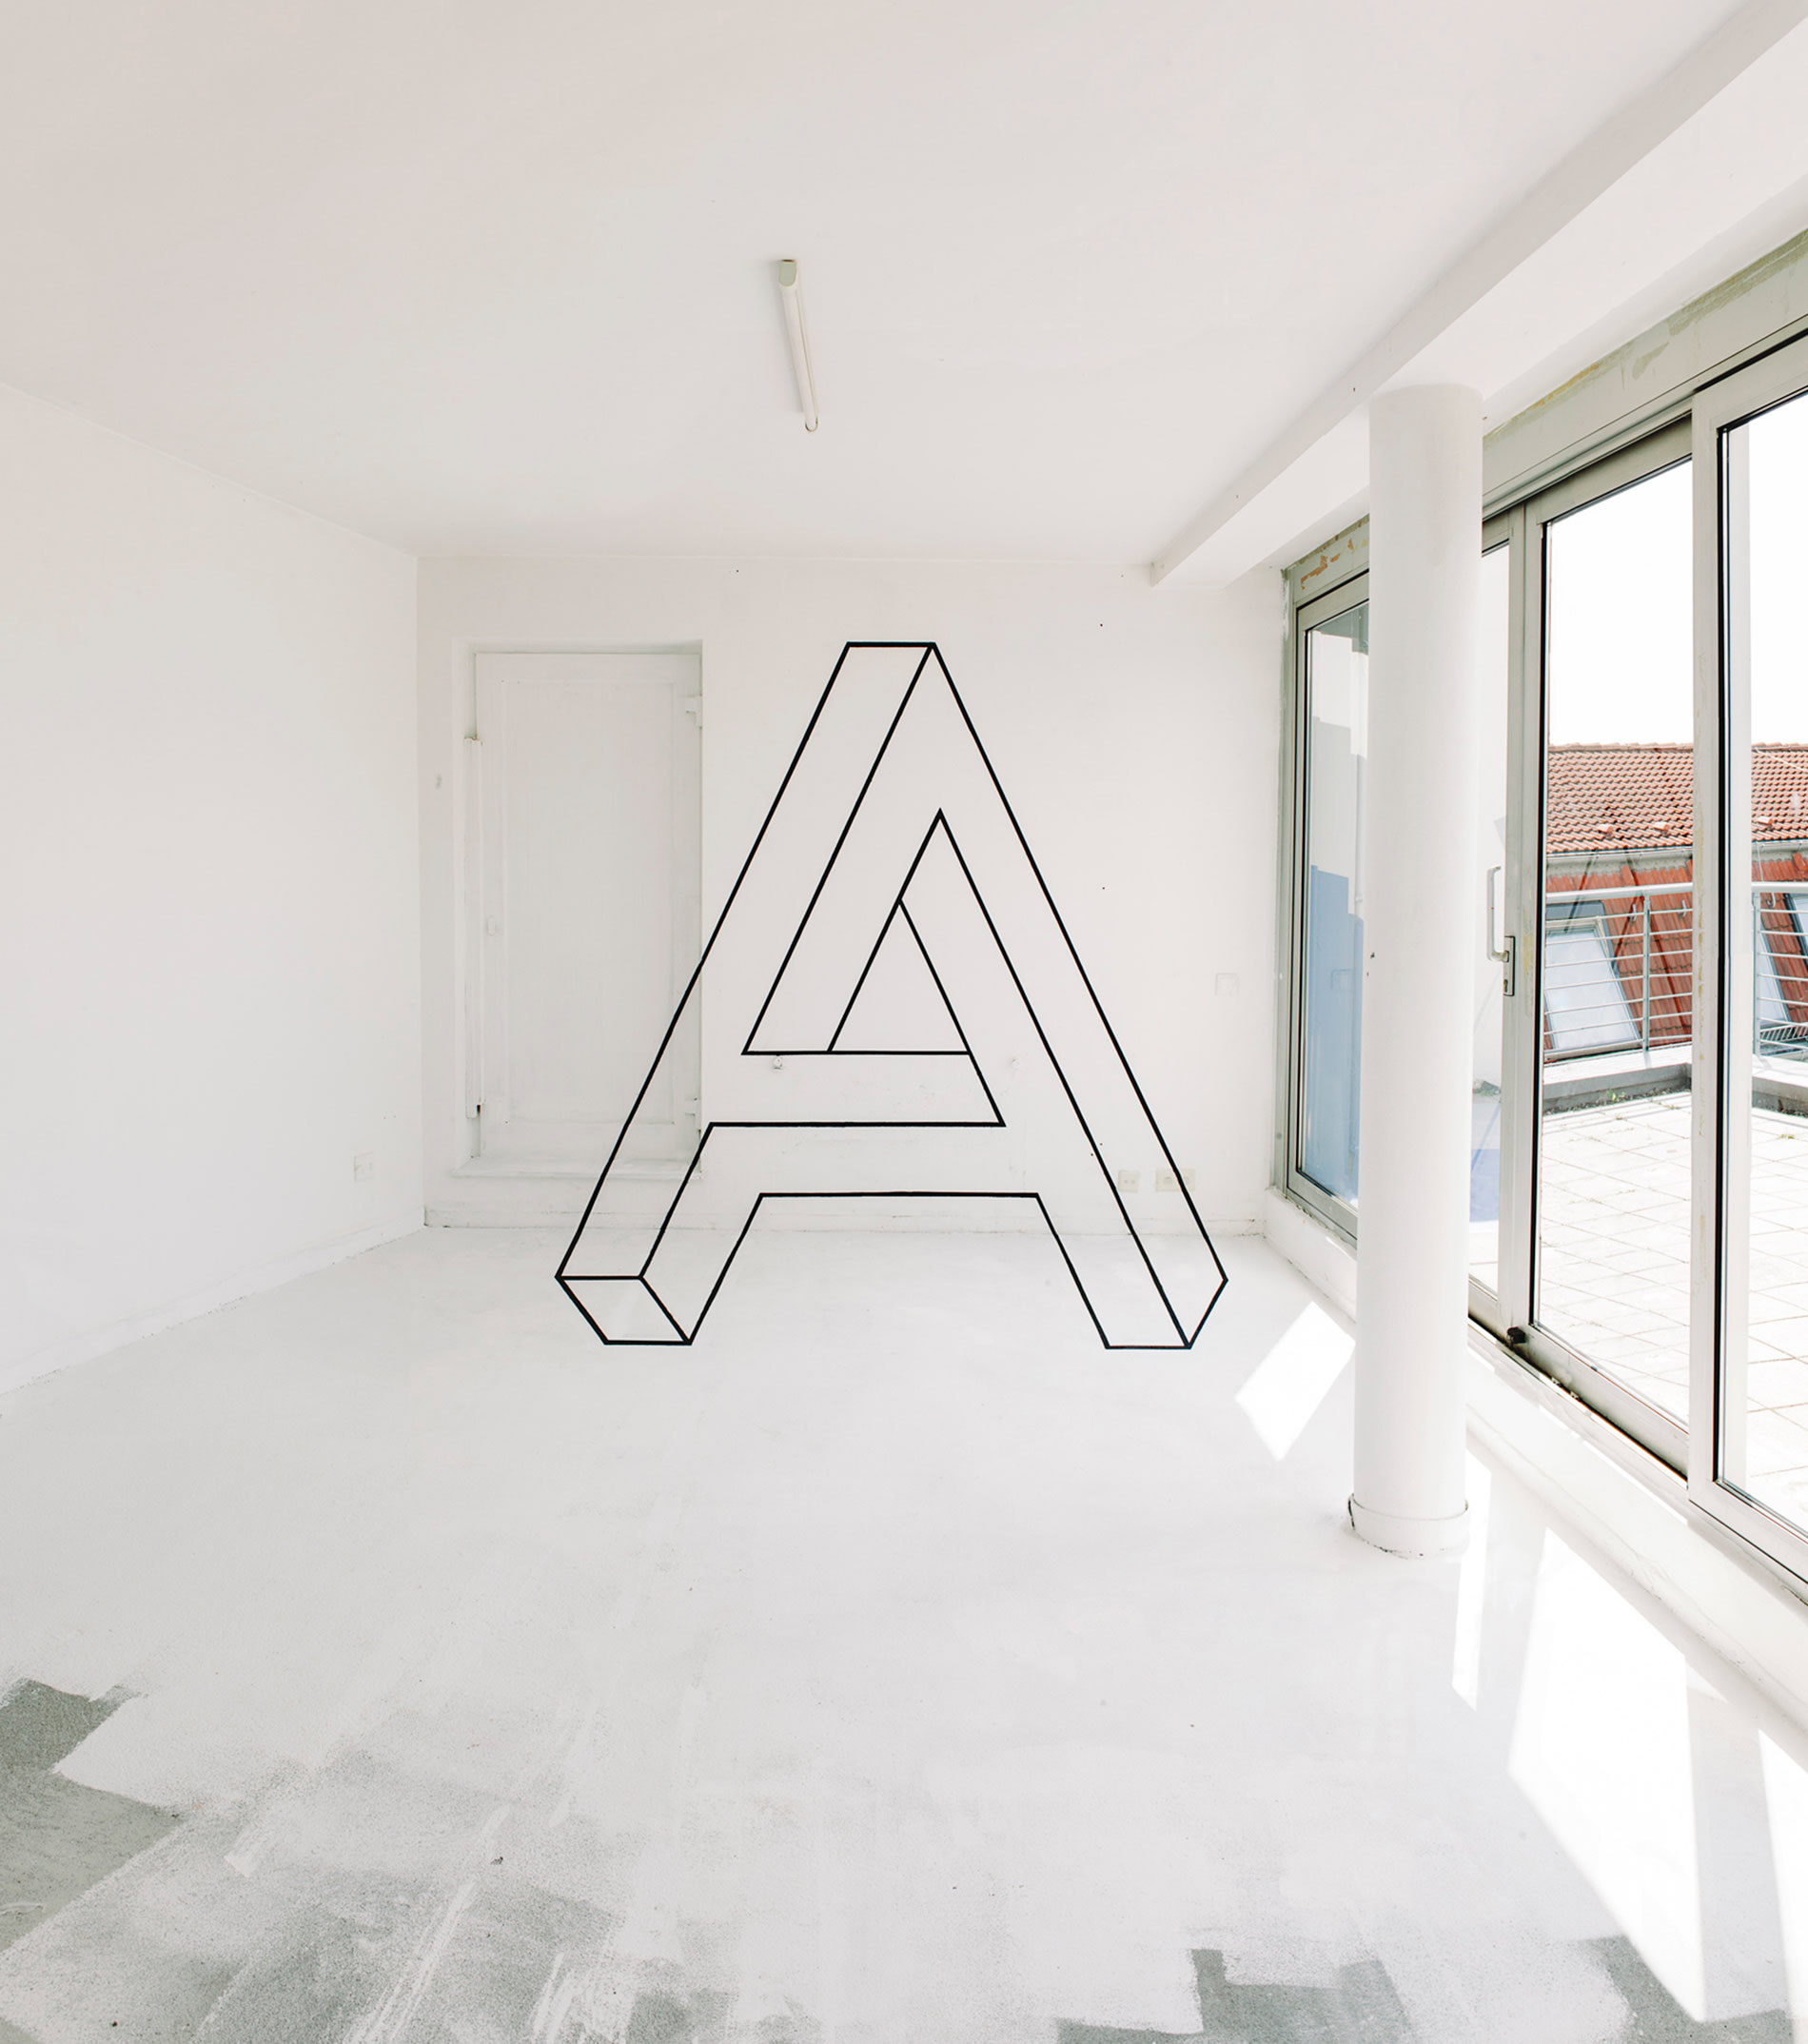 the letter A, impossible object, Anamorphic art by fanette g.